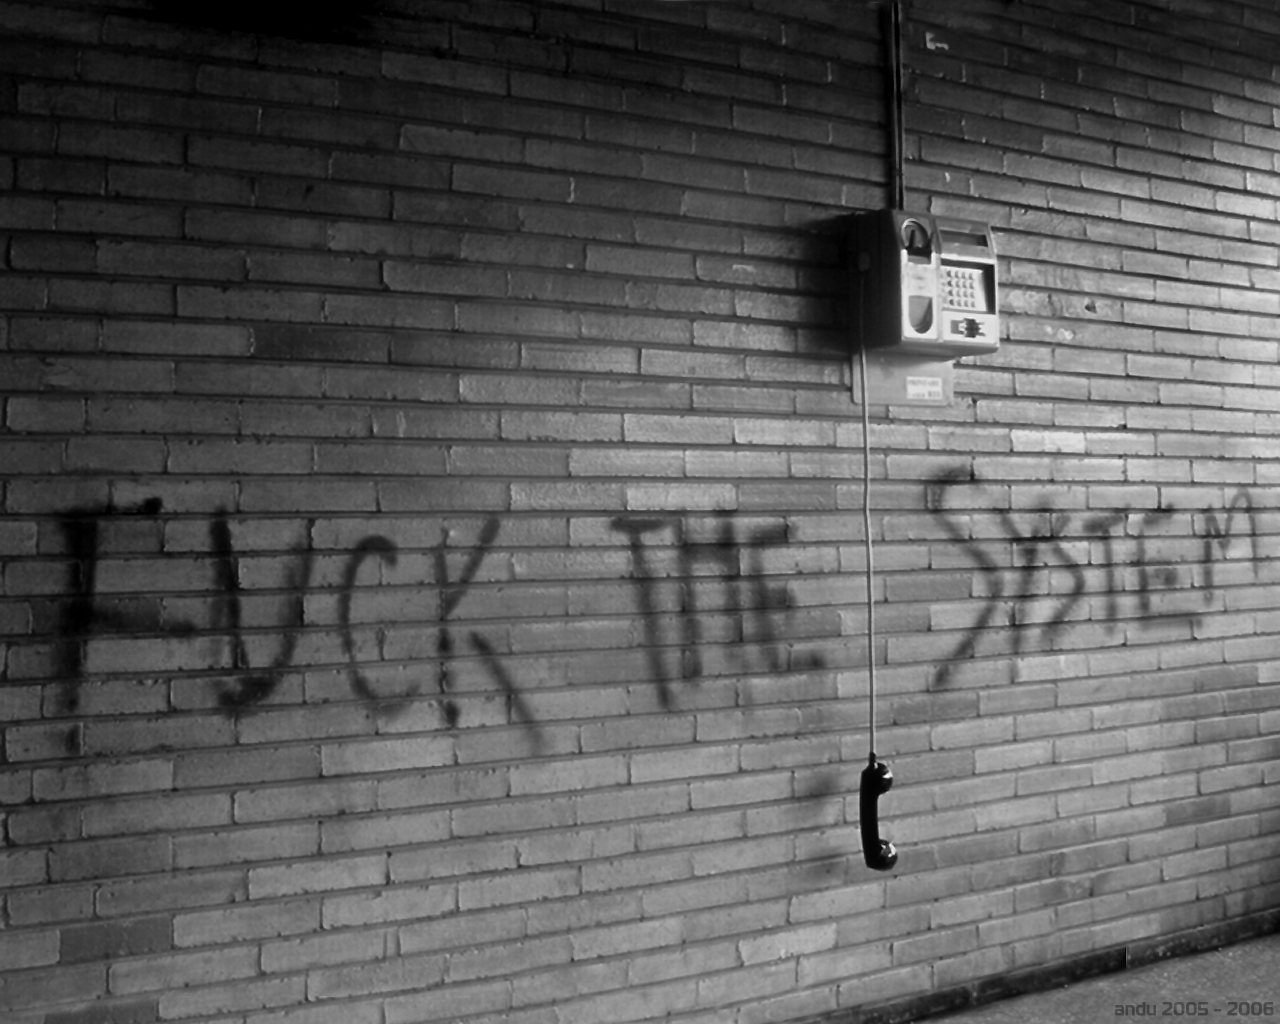 Fuck the system - wallpaper by anduq on DeviantArt